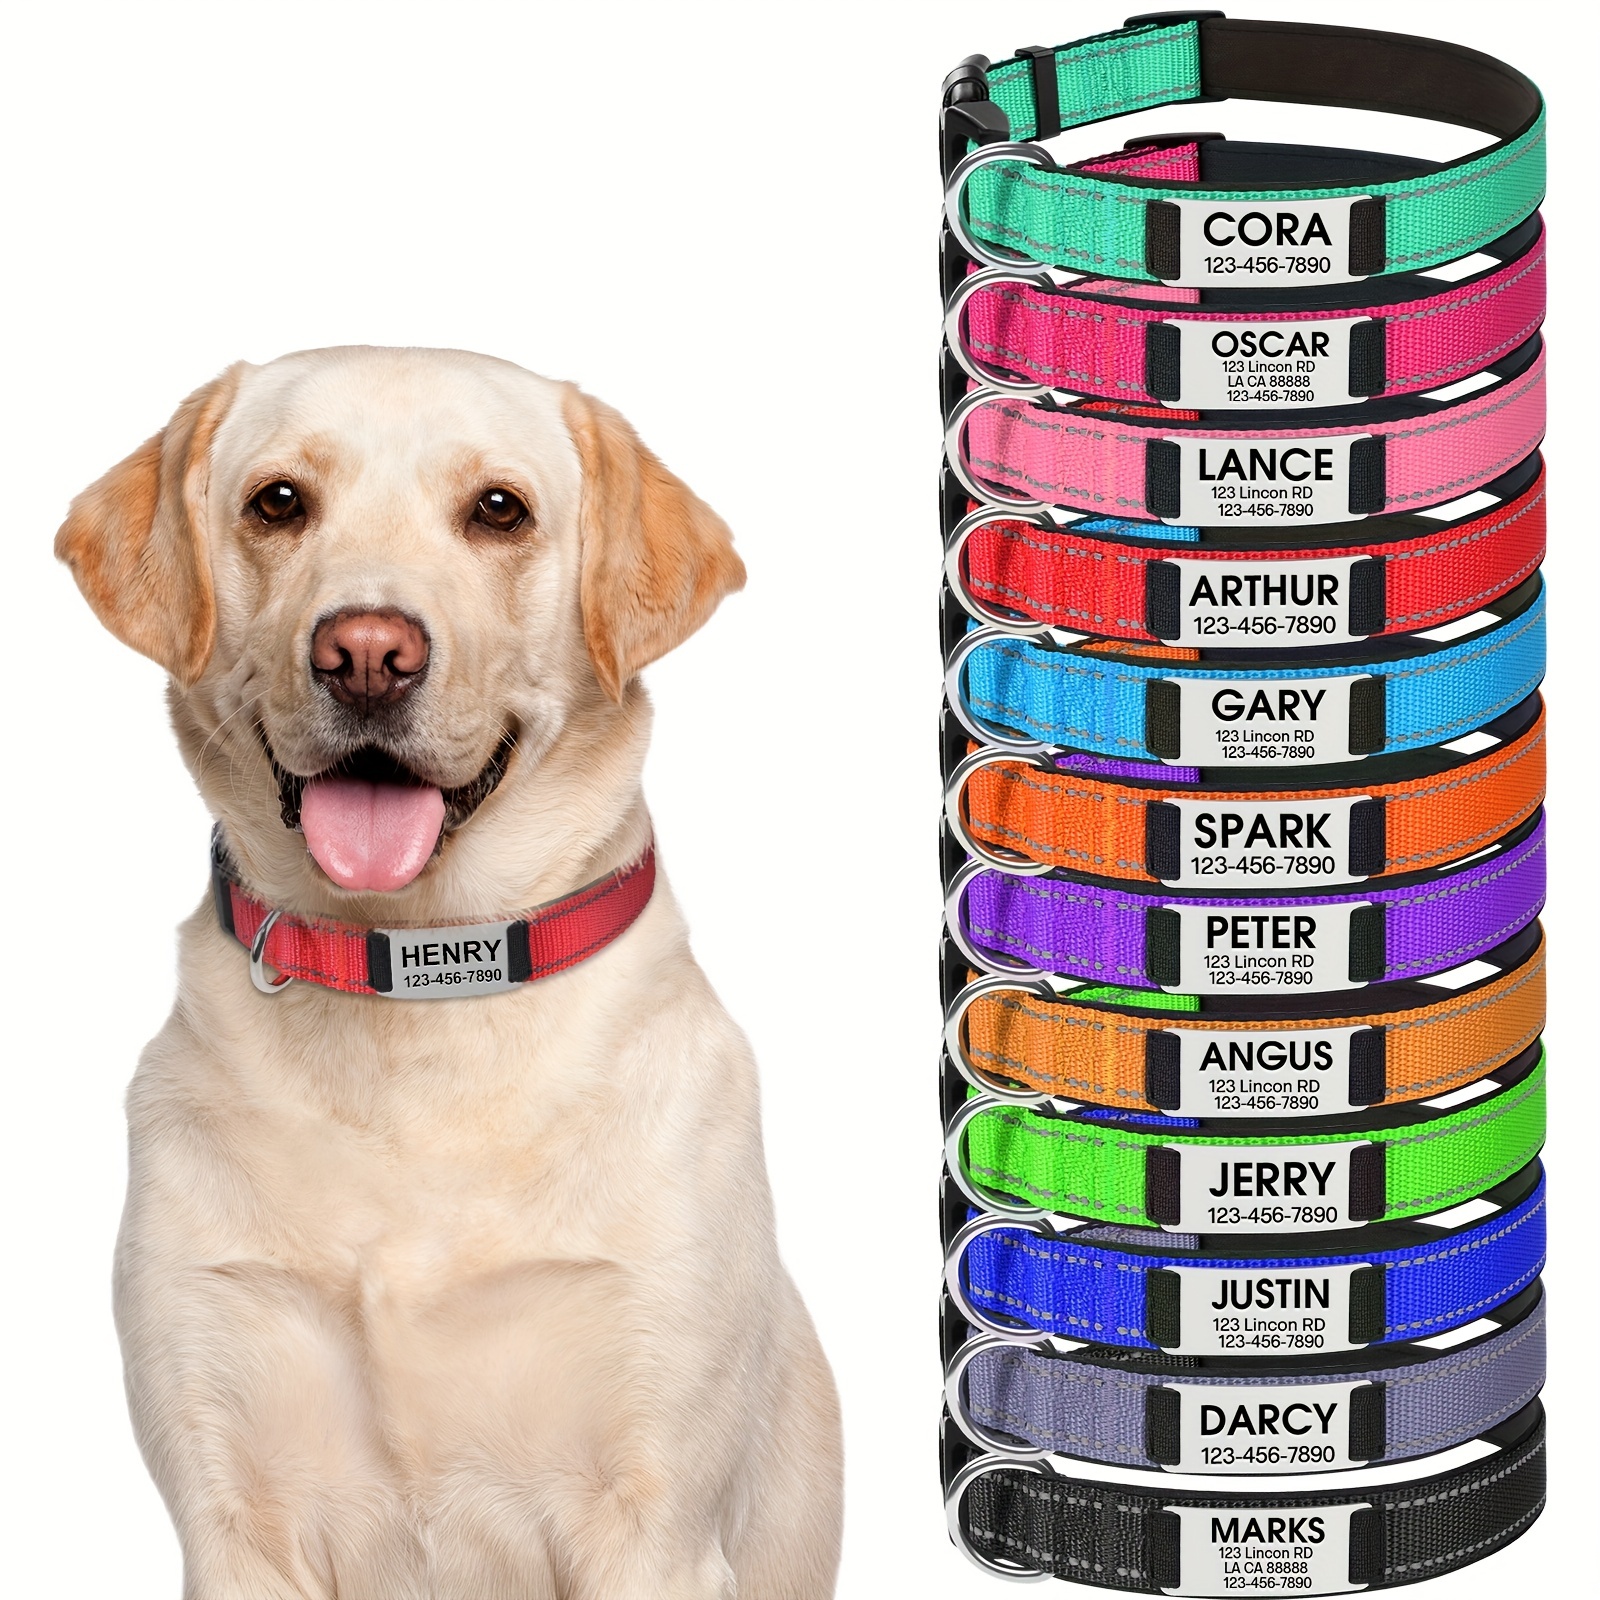 

Reflective Neoprene Dog Collar - Soft Padded Breathable Nylon Collar For Small And Medium Dogs - Personalized And Adjustable - Keep Your Pet Safe And Comfortable